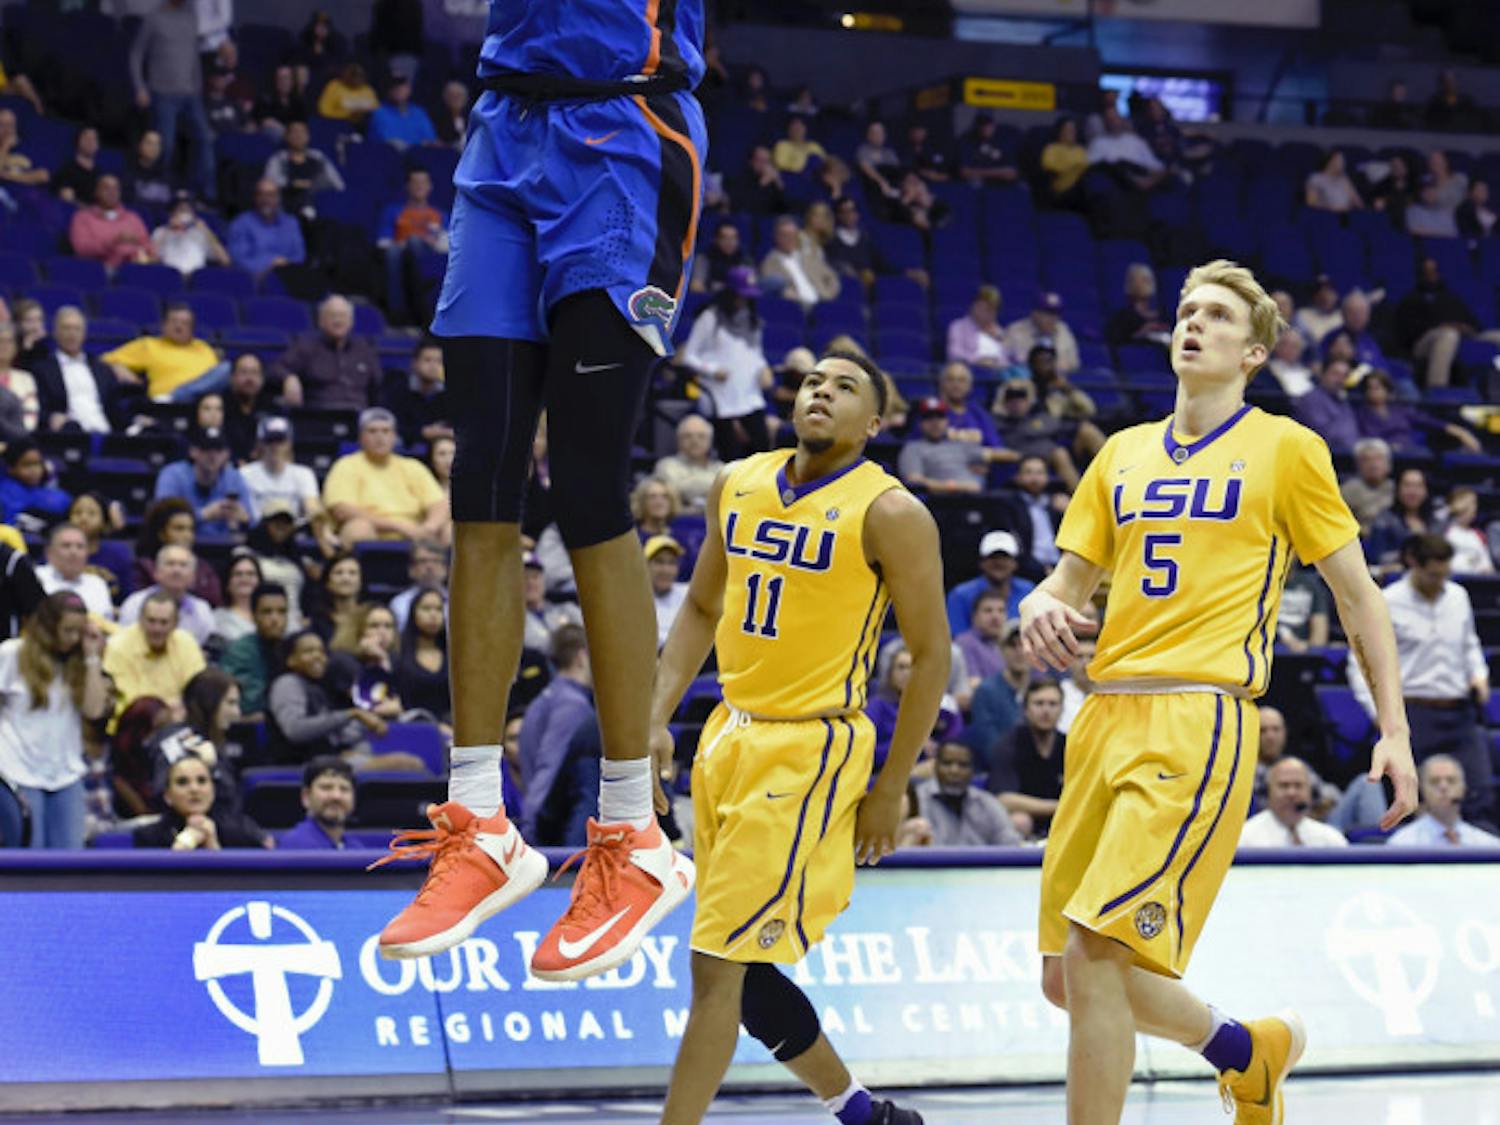 Florida forward Devin Robinson (1) dunks the ball for two of his game high 24-points as LSU guard Jalyn Patterson (11) and LSU guard Kieran Hayward (5) watch in the second half of an NCAA college basketball game, Wednesday, Jan. 25, 2017, in Baton Rouge, La. Florida won 106-71. (AP Photo/Bill Feig)